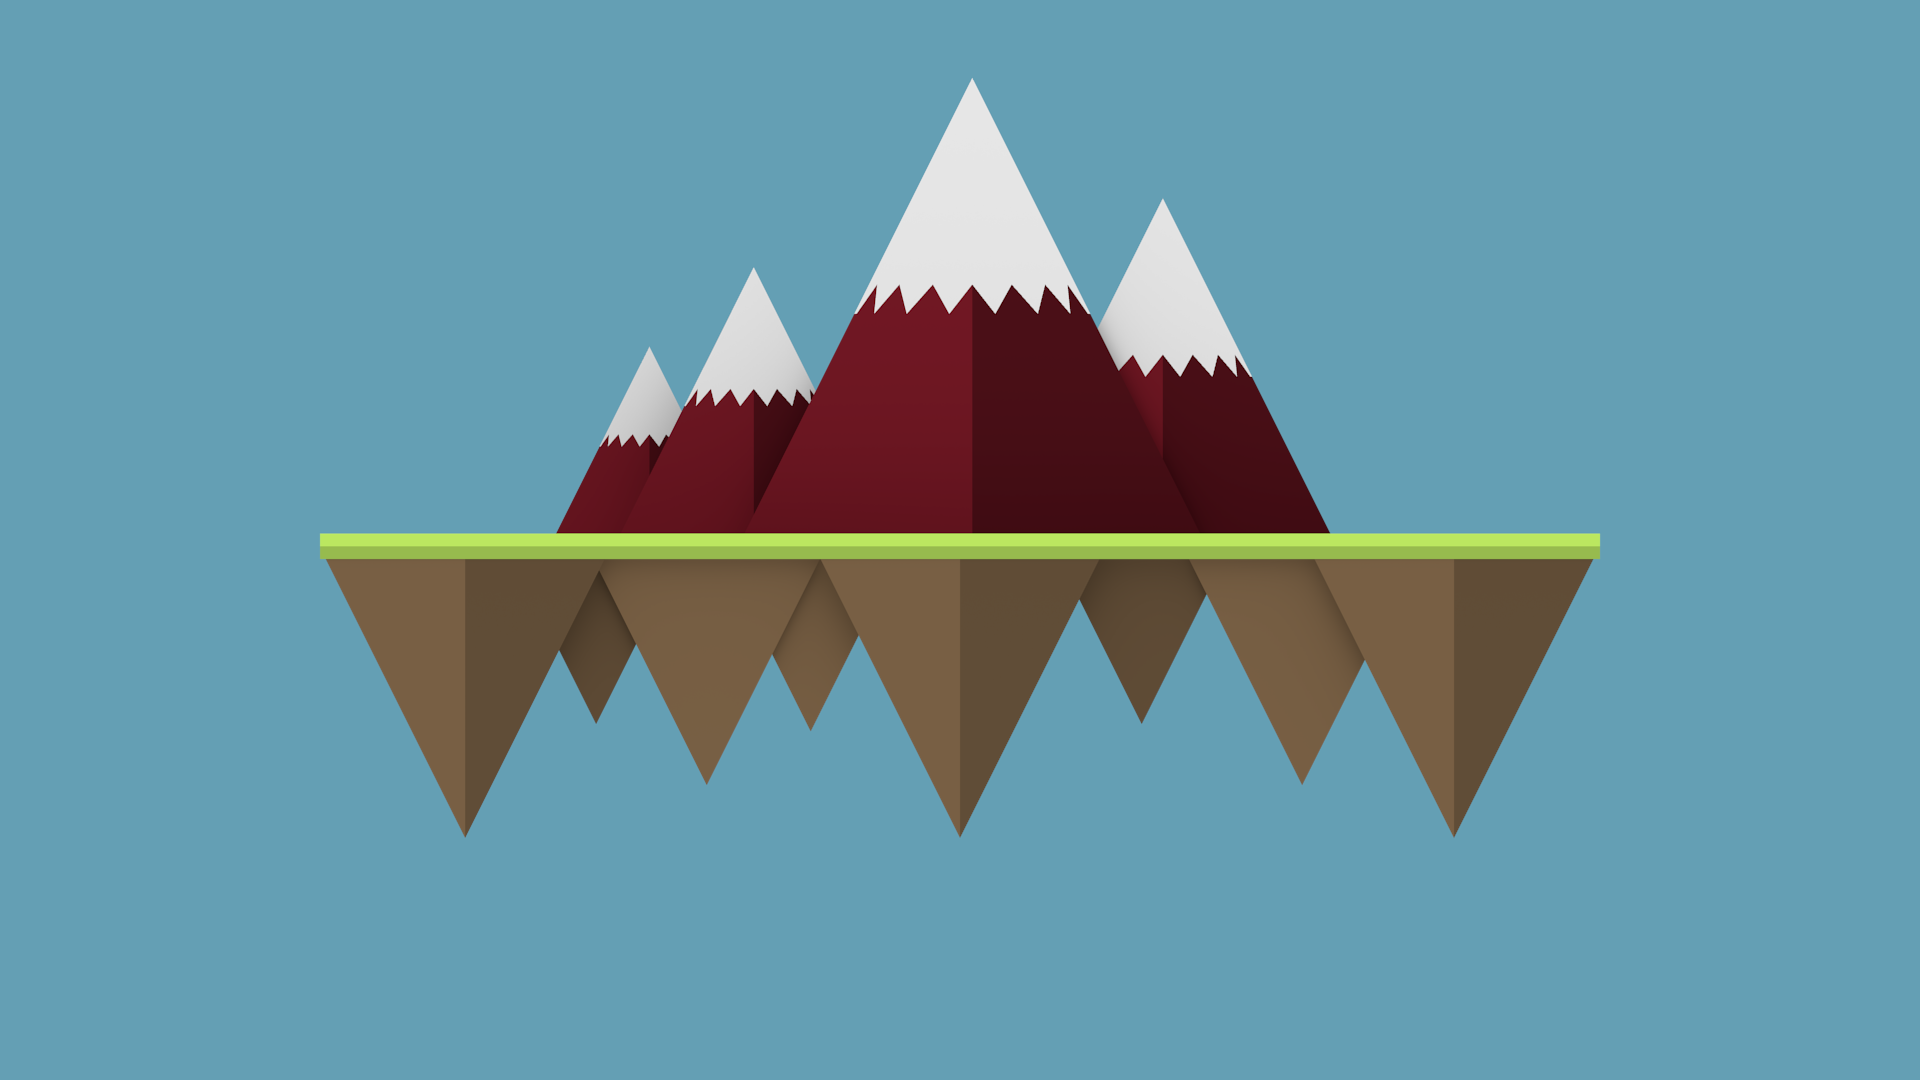 Flat Graphics: Floating Island by Gindew on DeviantArt